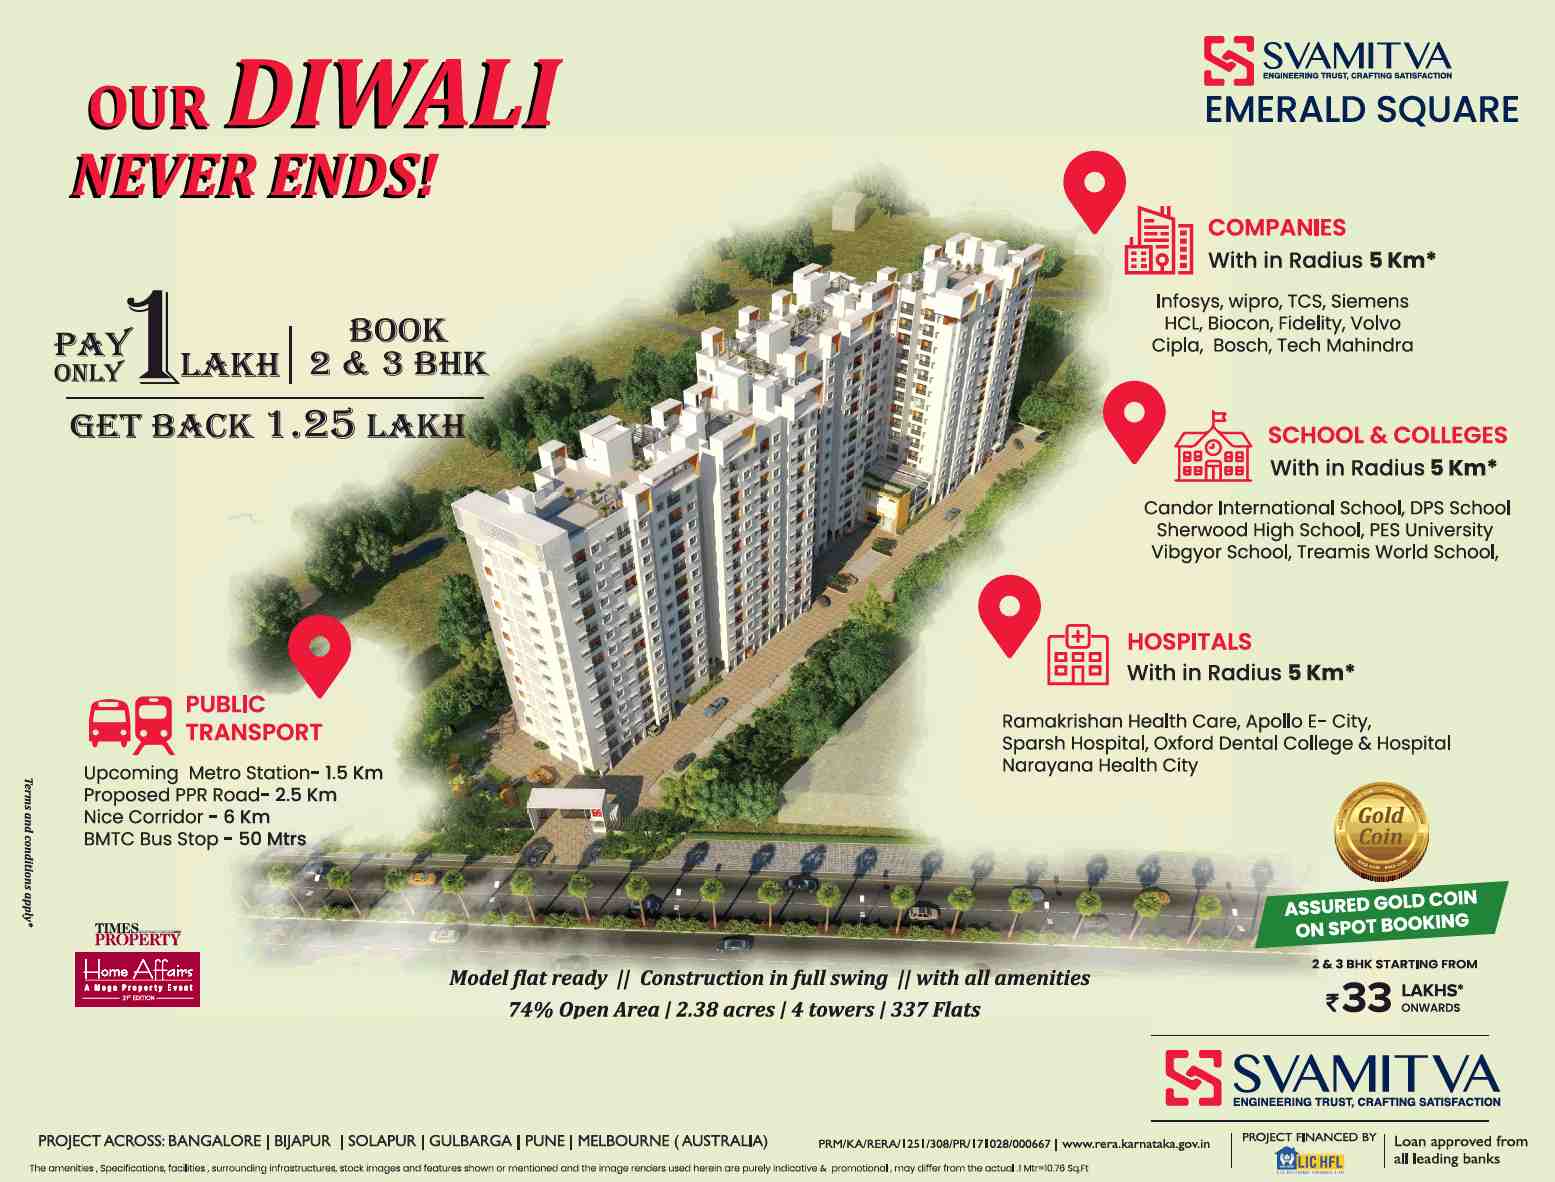 Pay only Rs. 1 Lakh & book your home at Svamitva Emerald Square in Bangalore